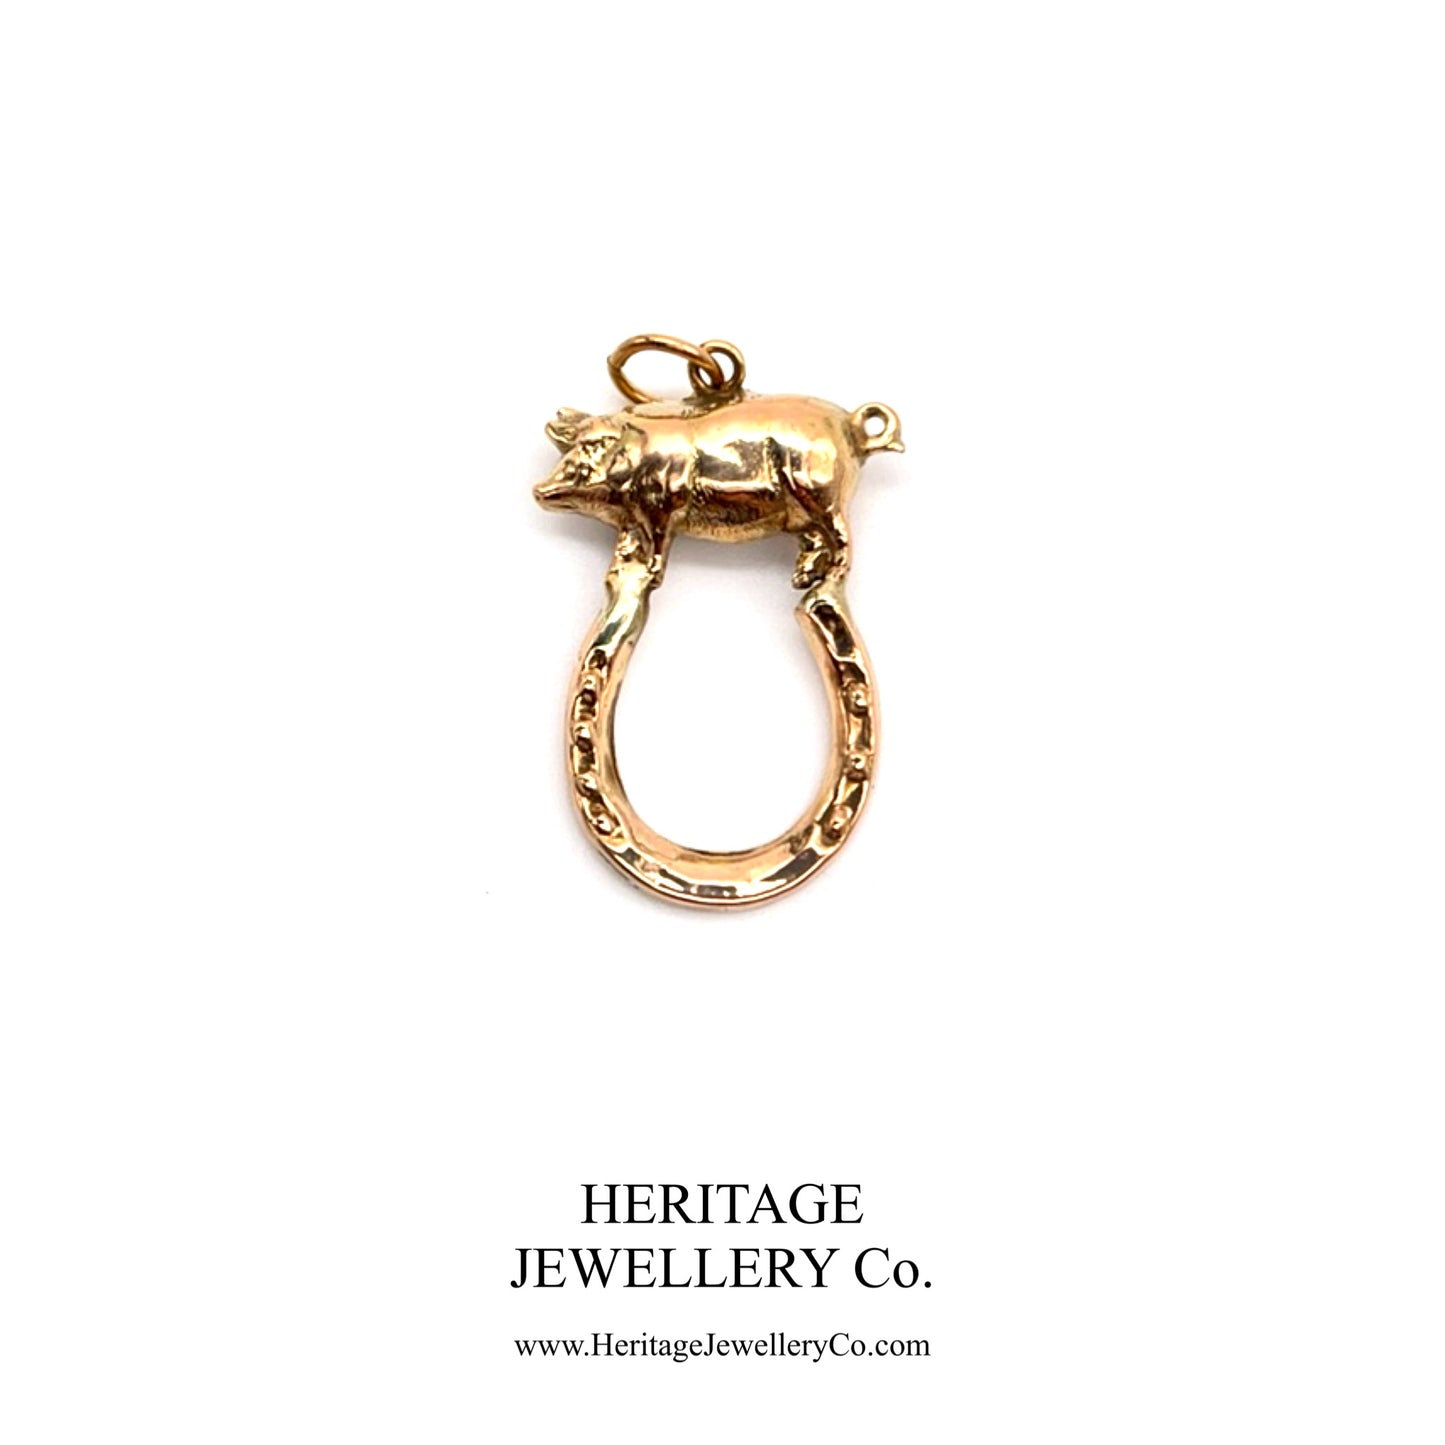 Victorian Pig and Horseshoe Lucky Pedant / Charm (9ct gold; c.1890-1900)